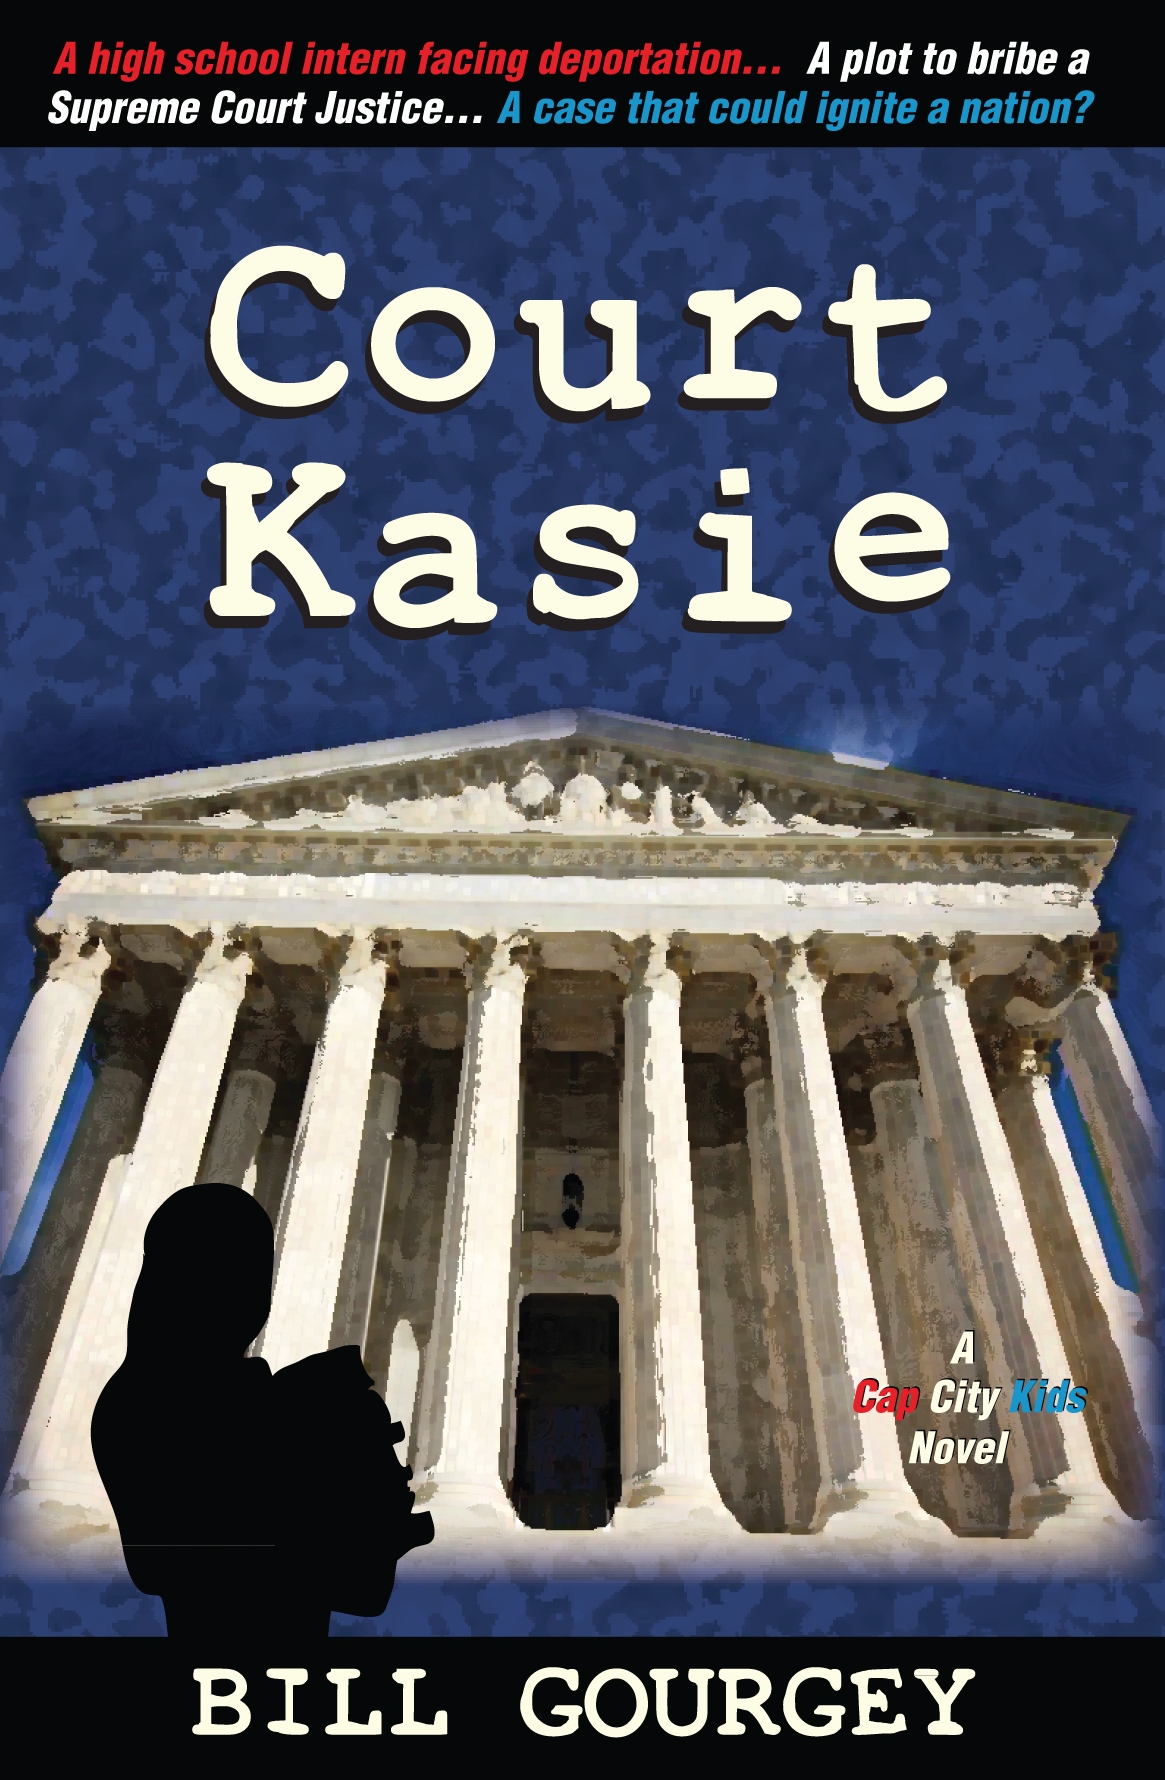 Bill Gourgey s Timely New Novel Court Kasie Explores What Happens